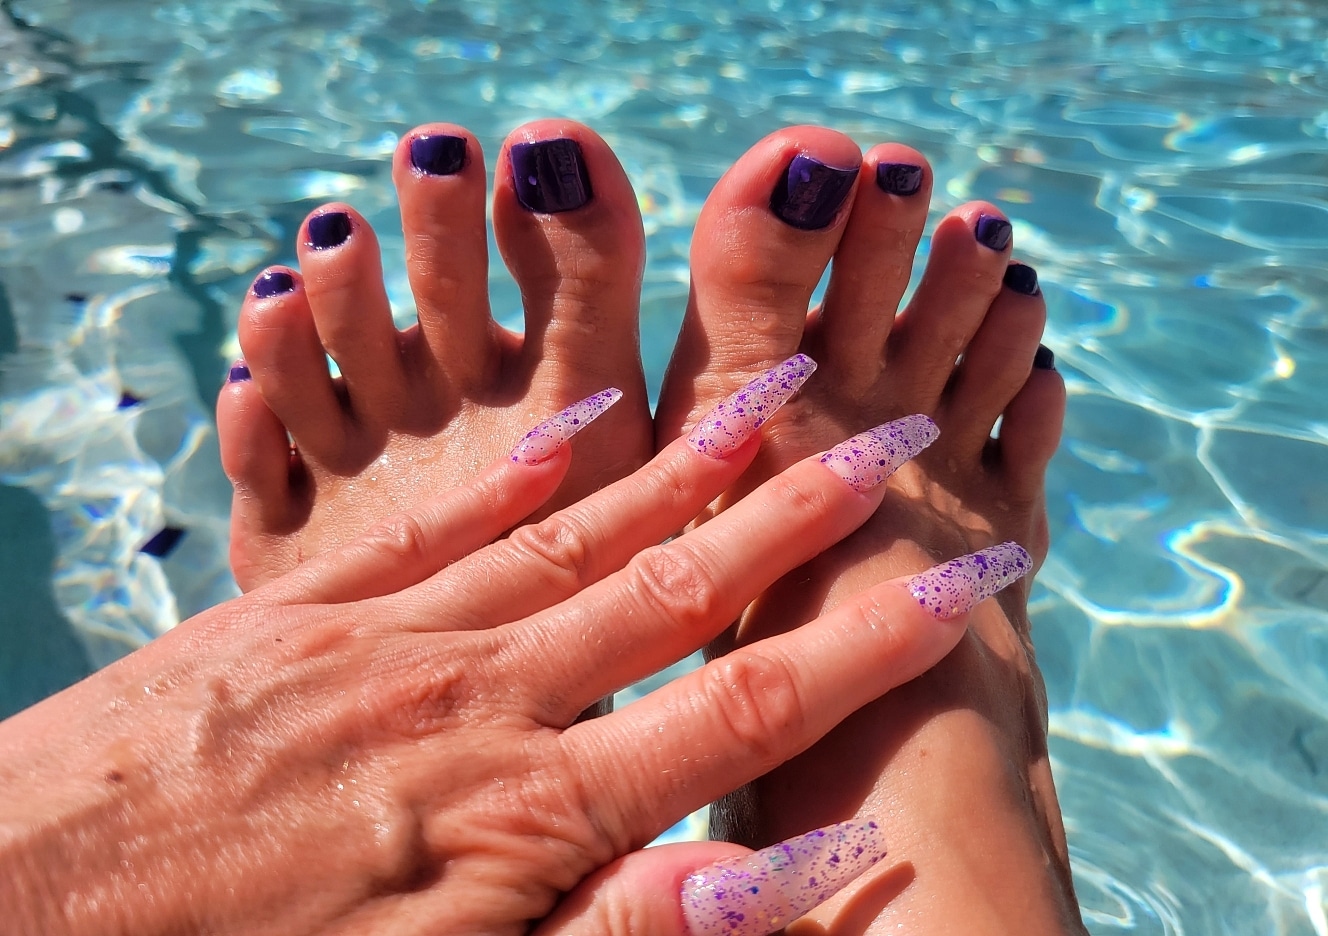 content/wet-purple-nails-and-toes/0.jpg